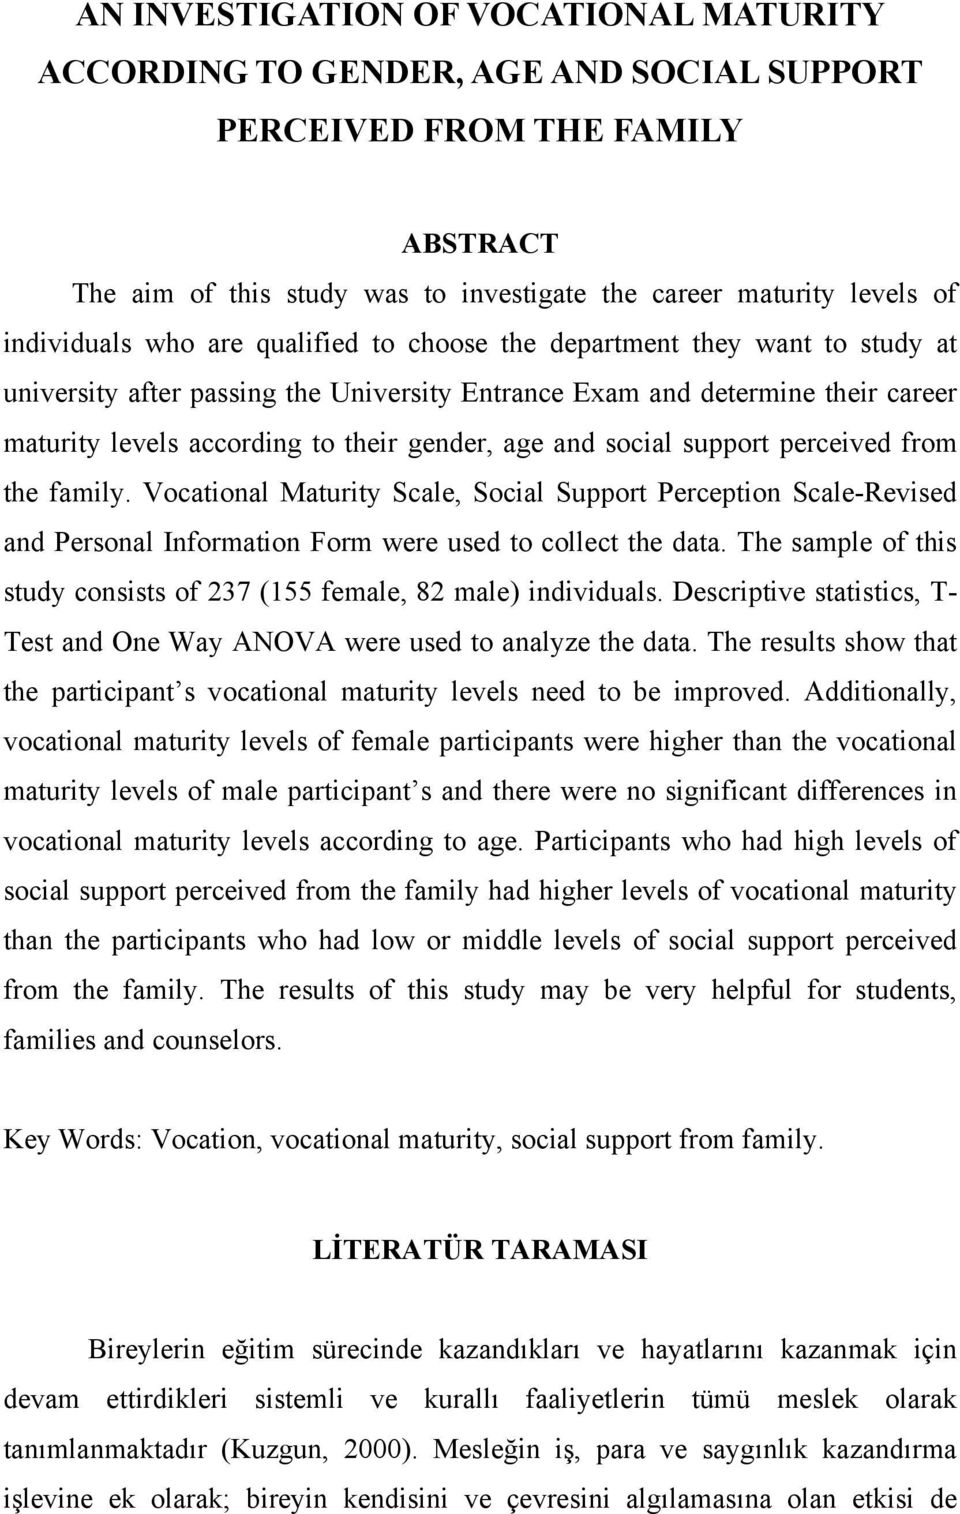 gender, age and social support perceived from the family. Vocational Maturity Scale, Social Support Perception Scale-Revised and Personal Information Form were used to collect the data.